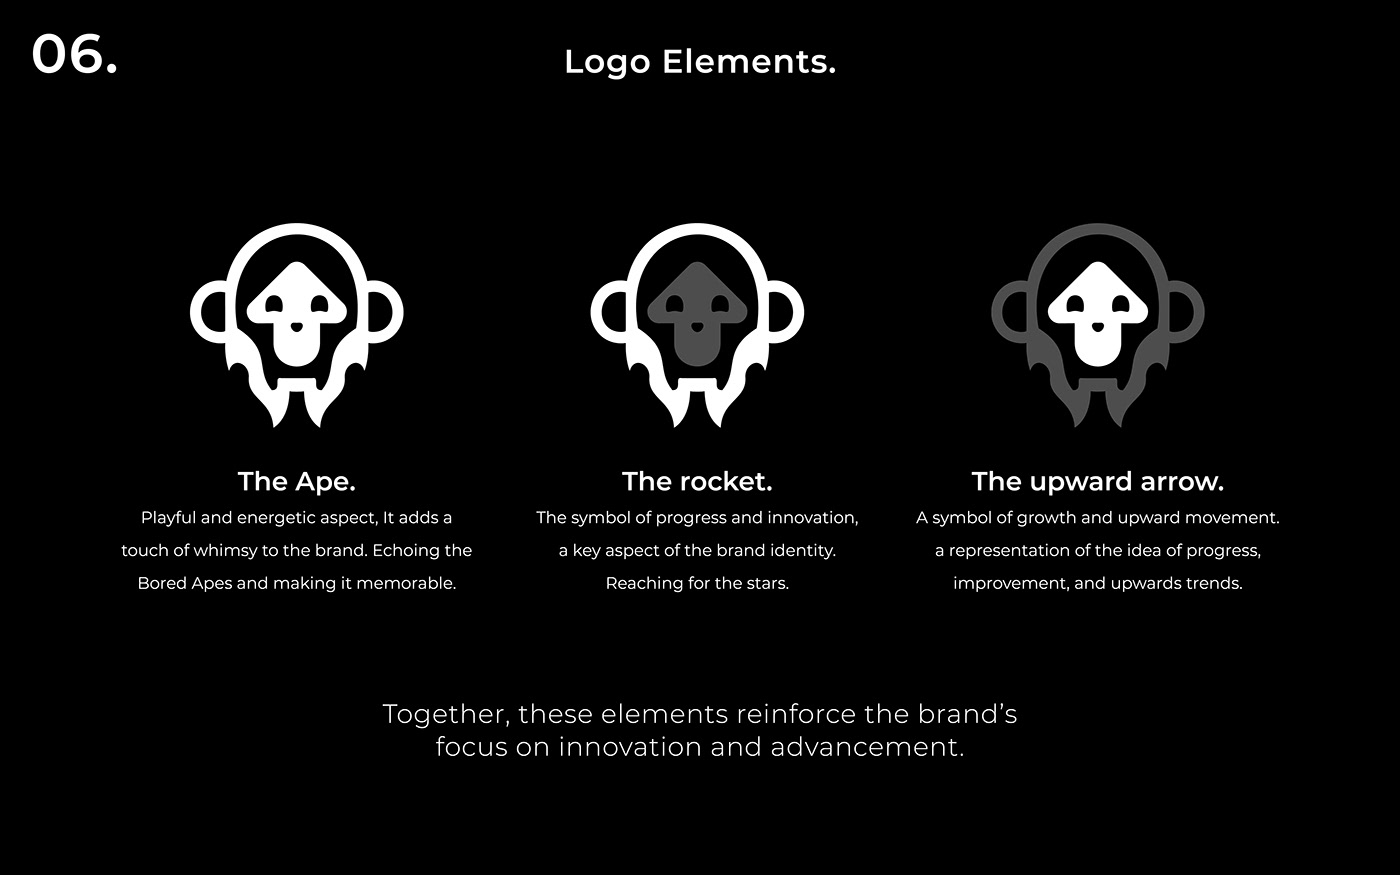 Image showing the different parts of the logo, and the iconography and meaning behind it. 